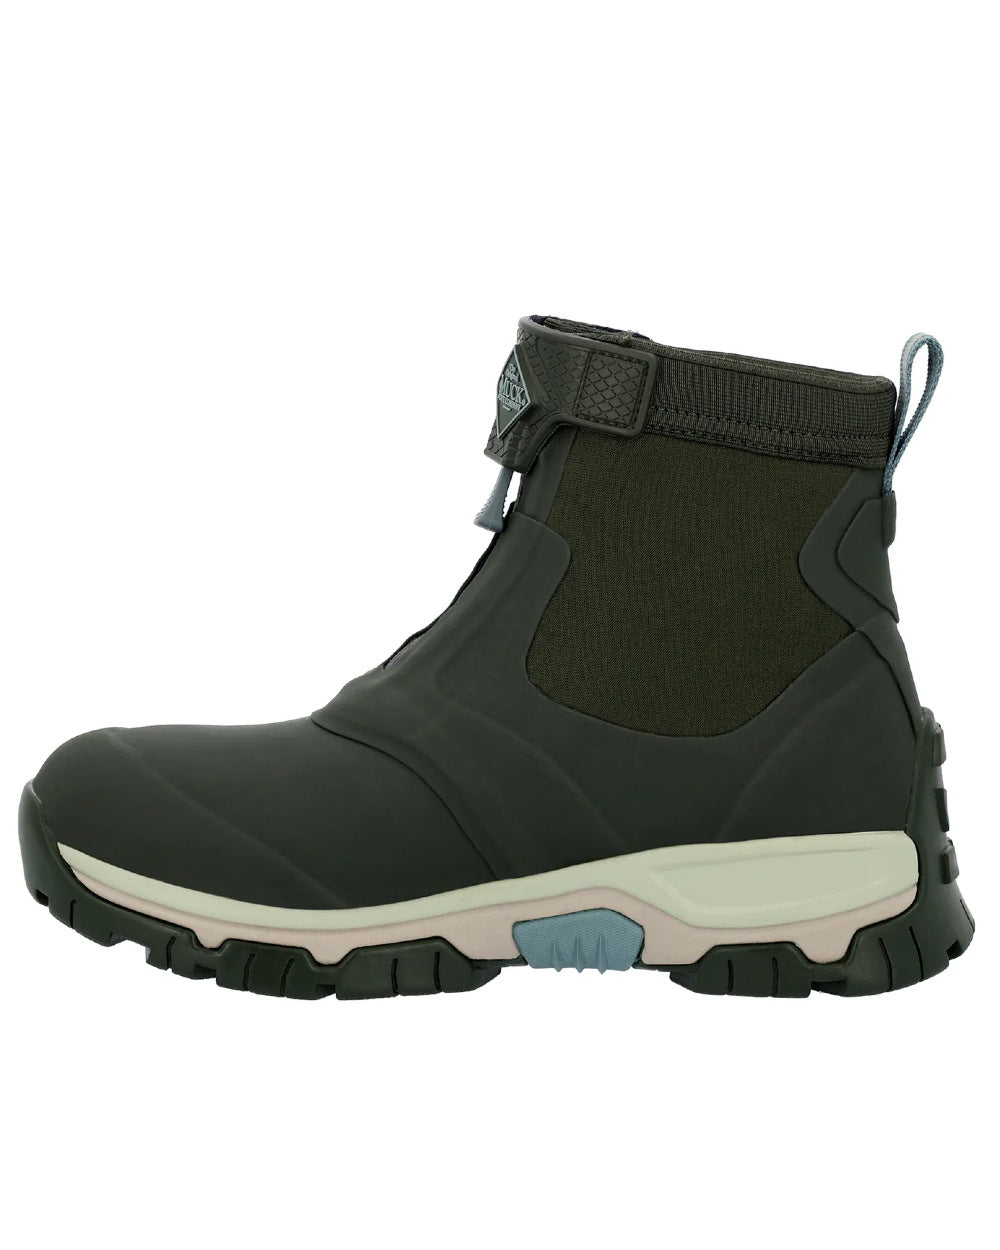 Dark Moss Coloured Muck Boots Ladies Apex Zip Mid Boots On A White Background 